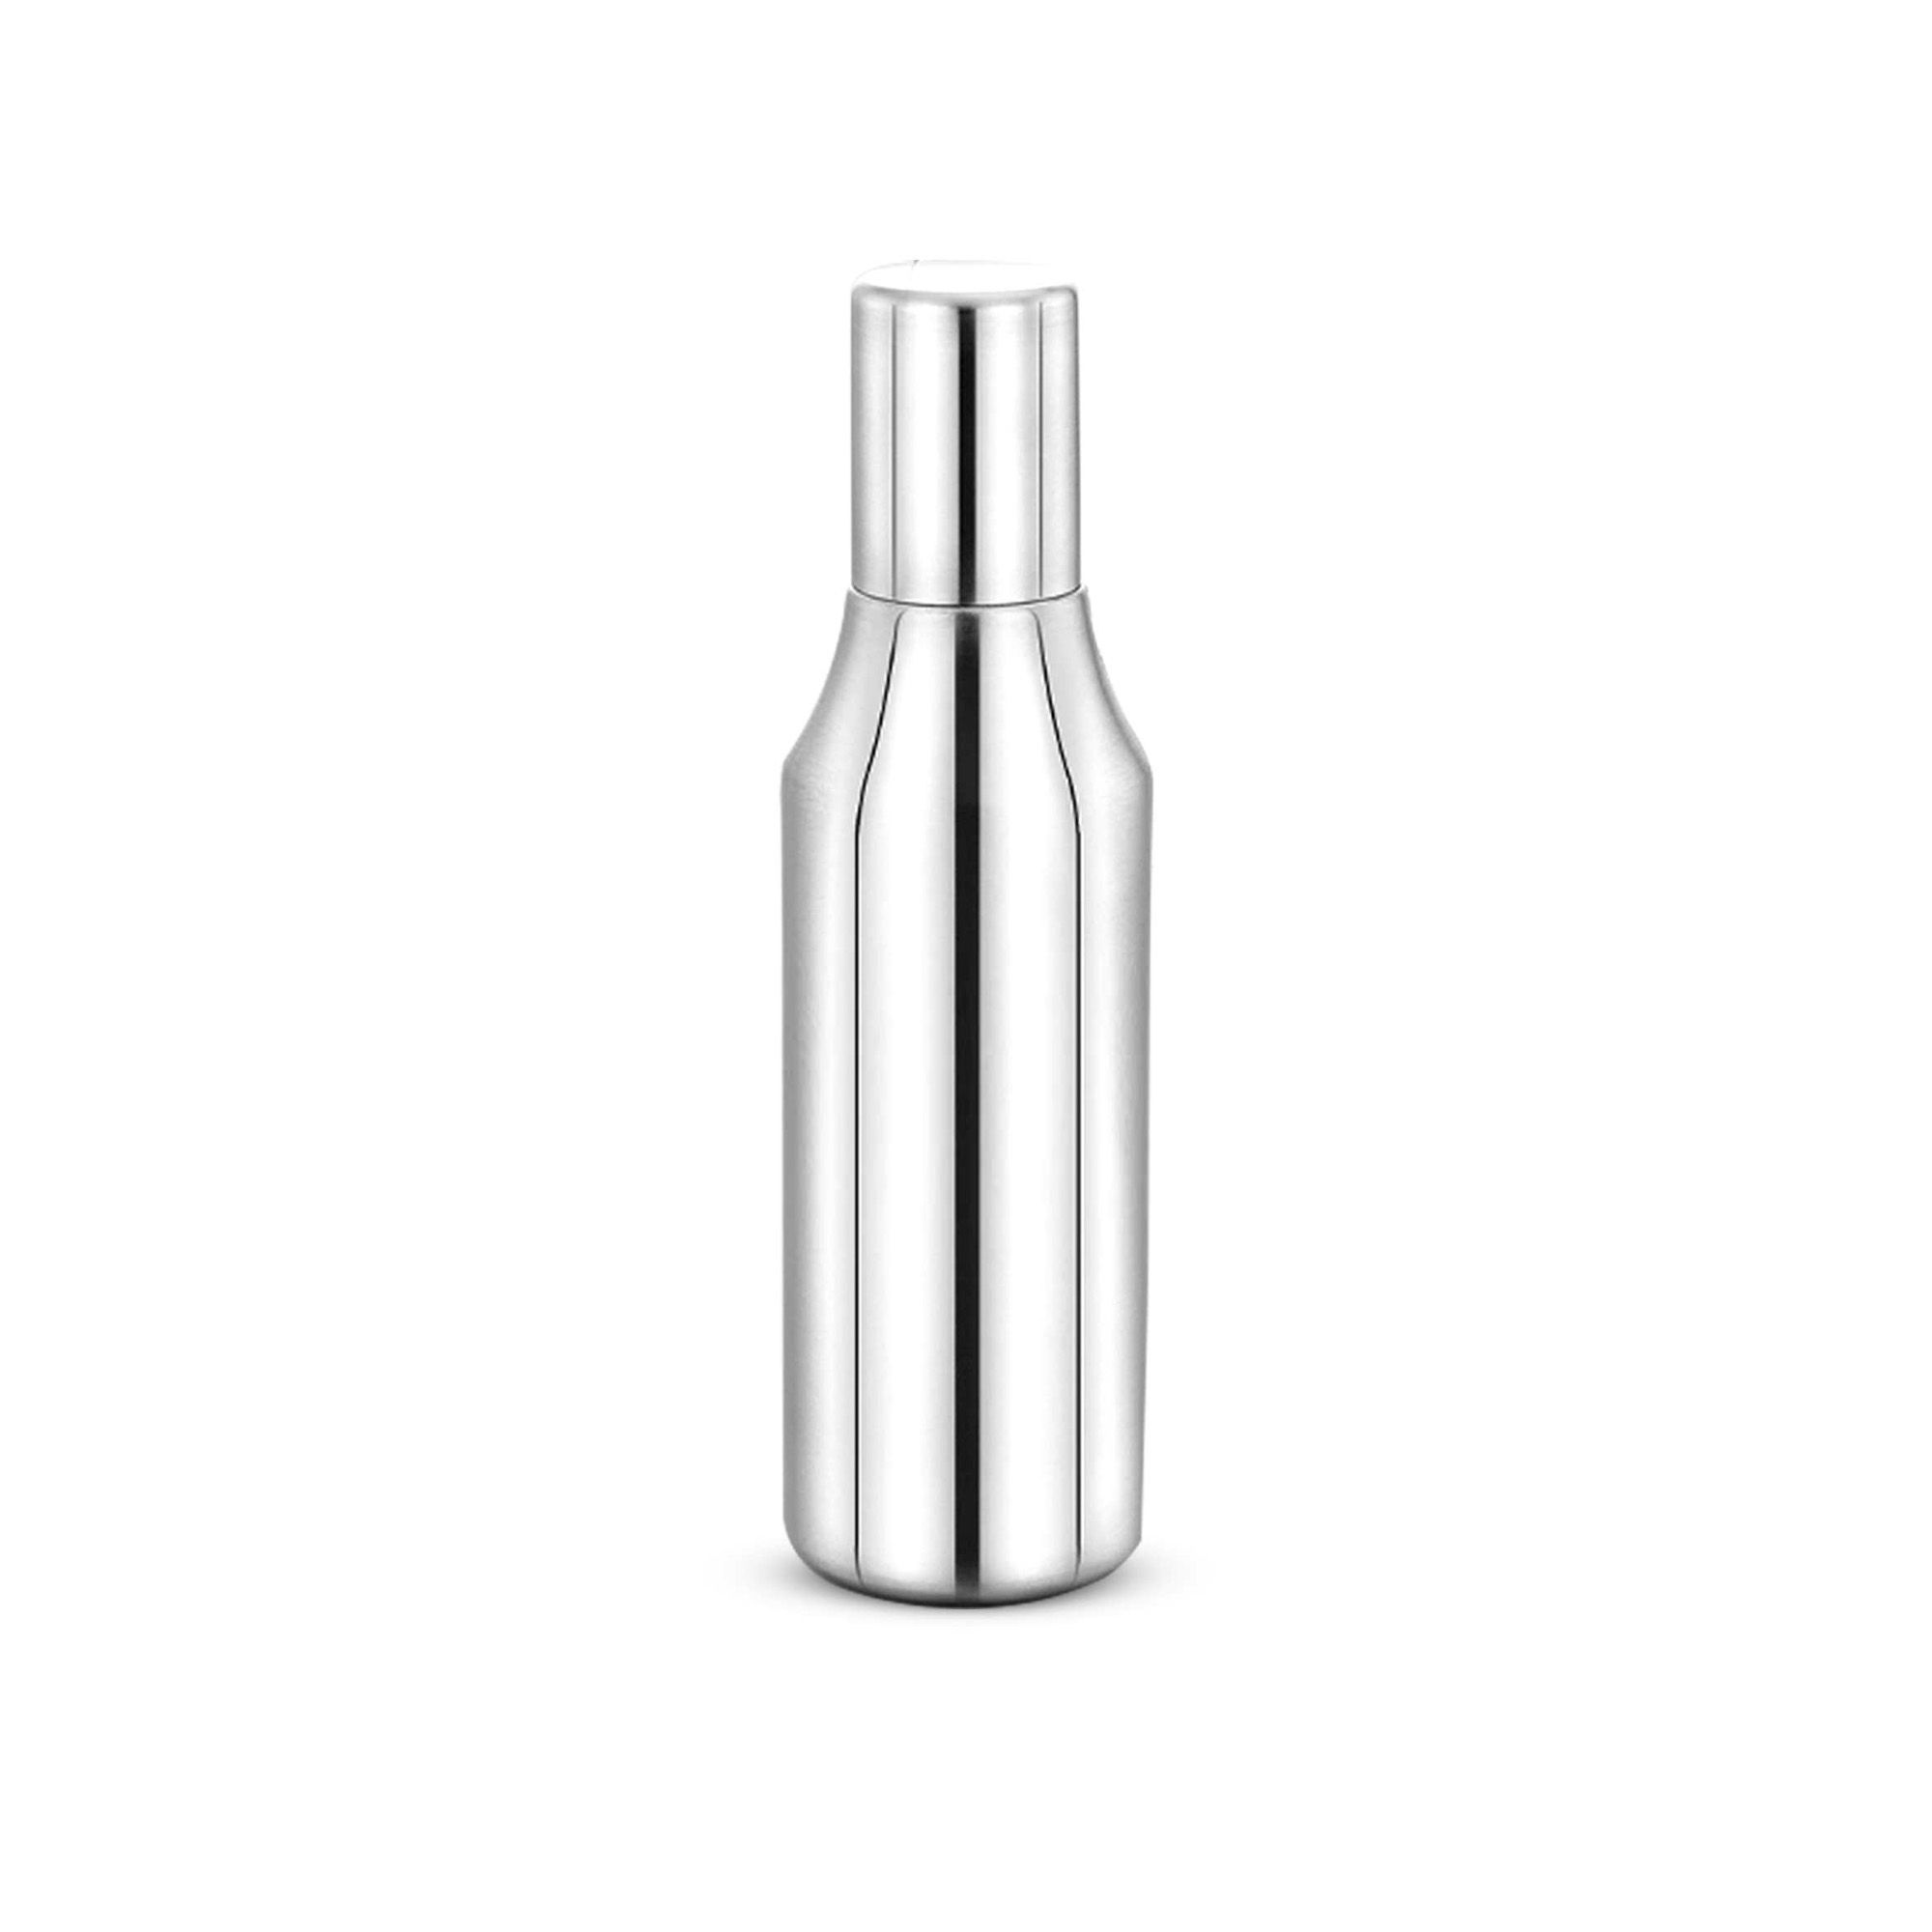 MAXIMA Stainless Steel Oil Dispenser With Lid - 1000ml 